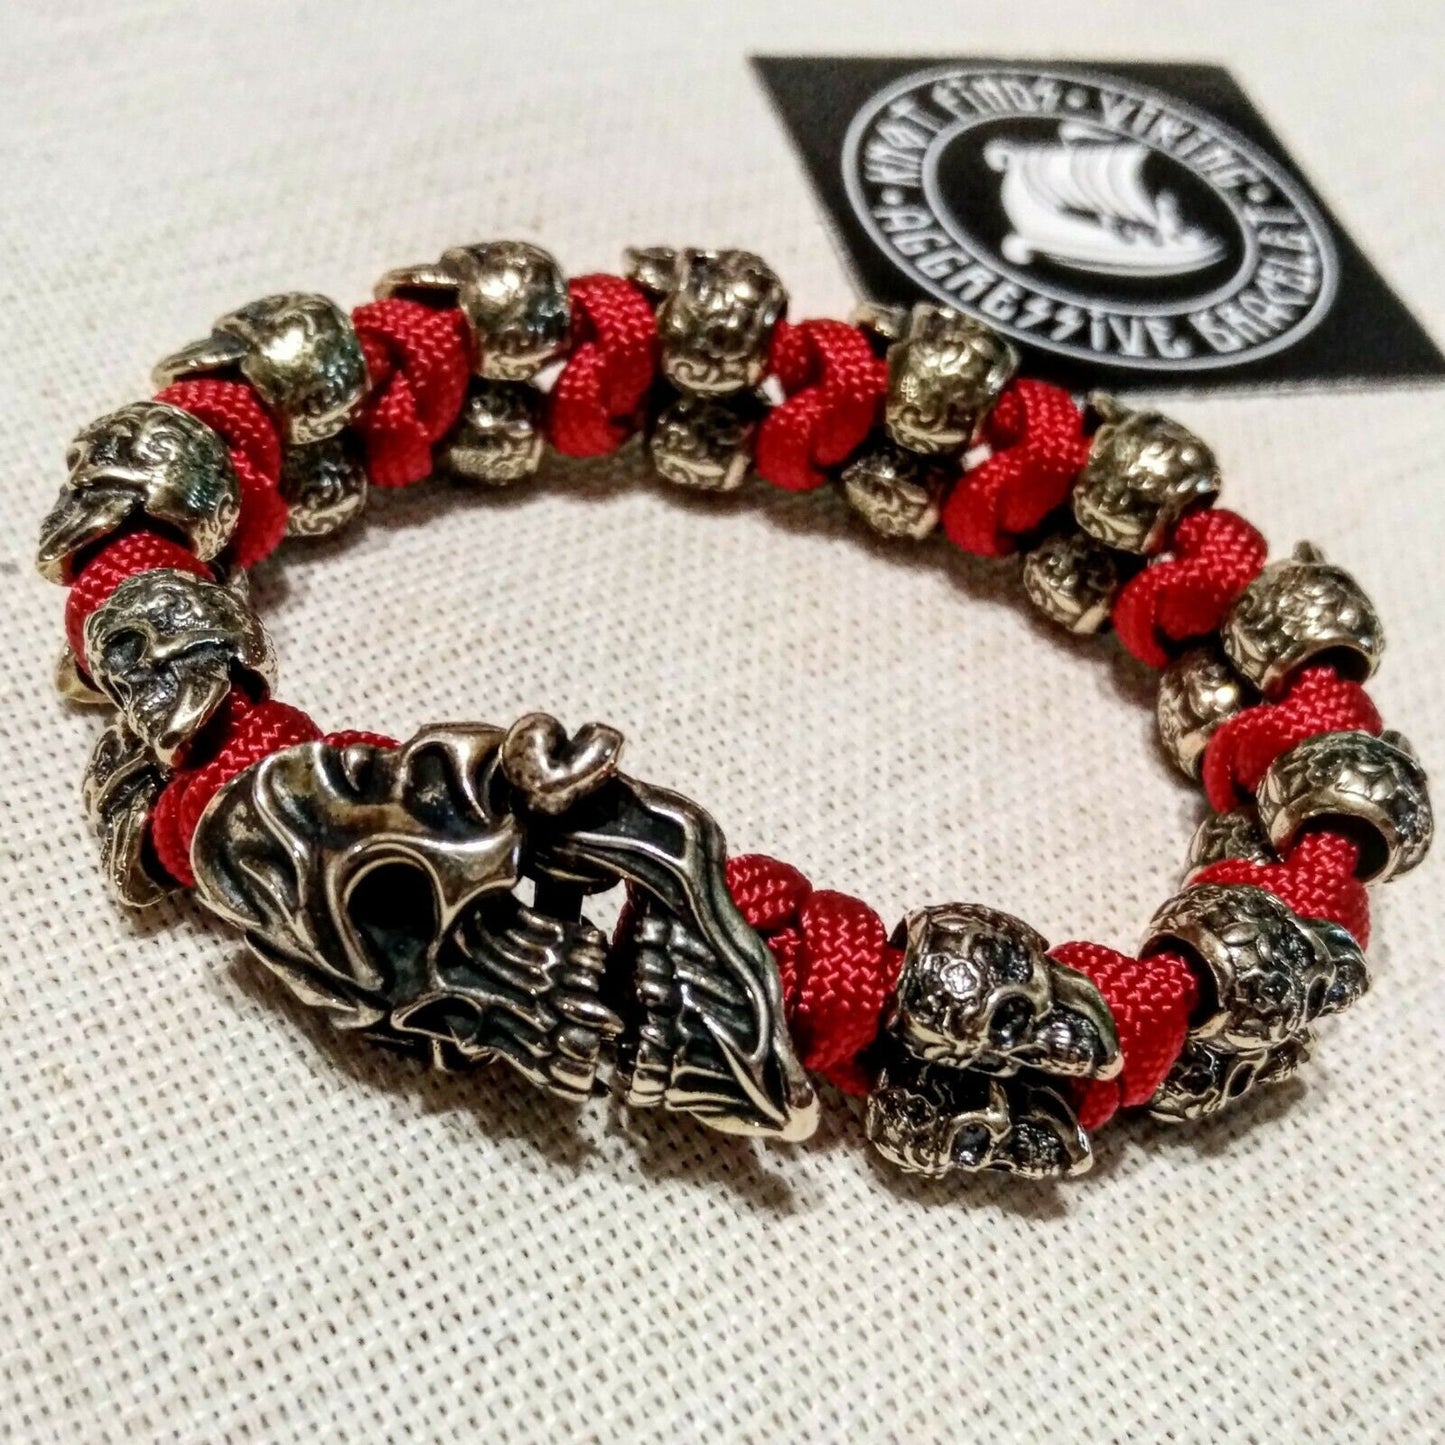 Horror skull paracord bracelet. A great gift for men and women who prefer a brutal style and a symbol of the skull. Celtic knots.